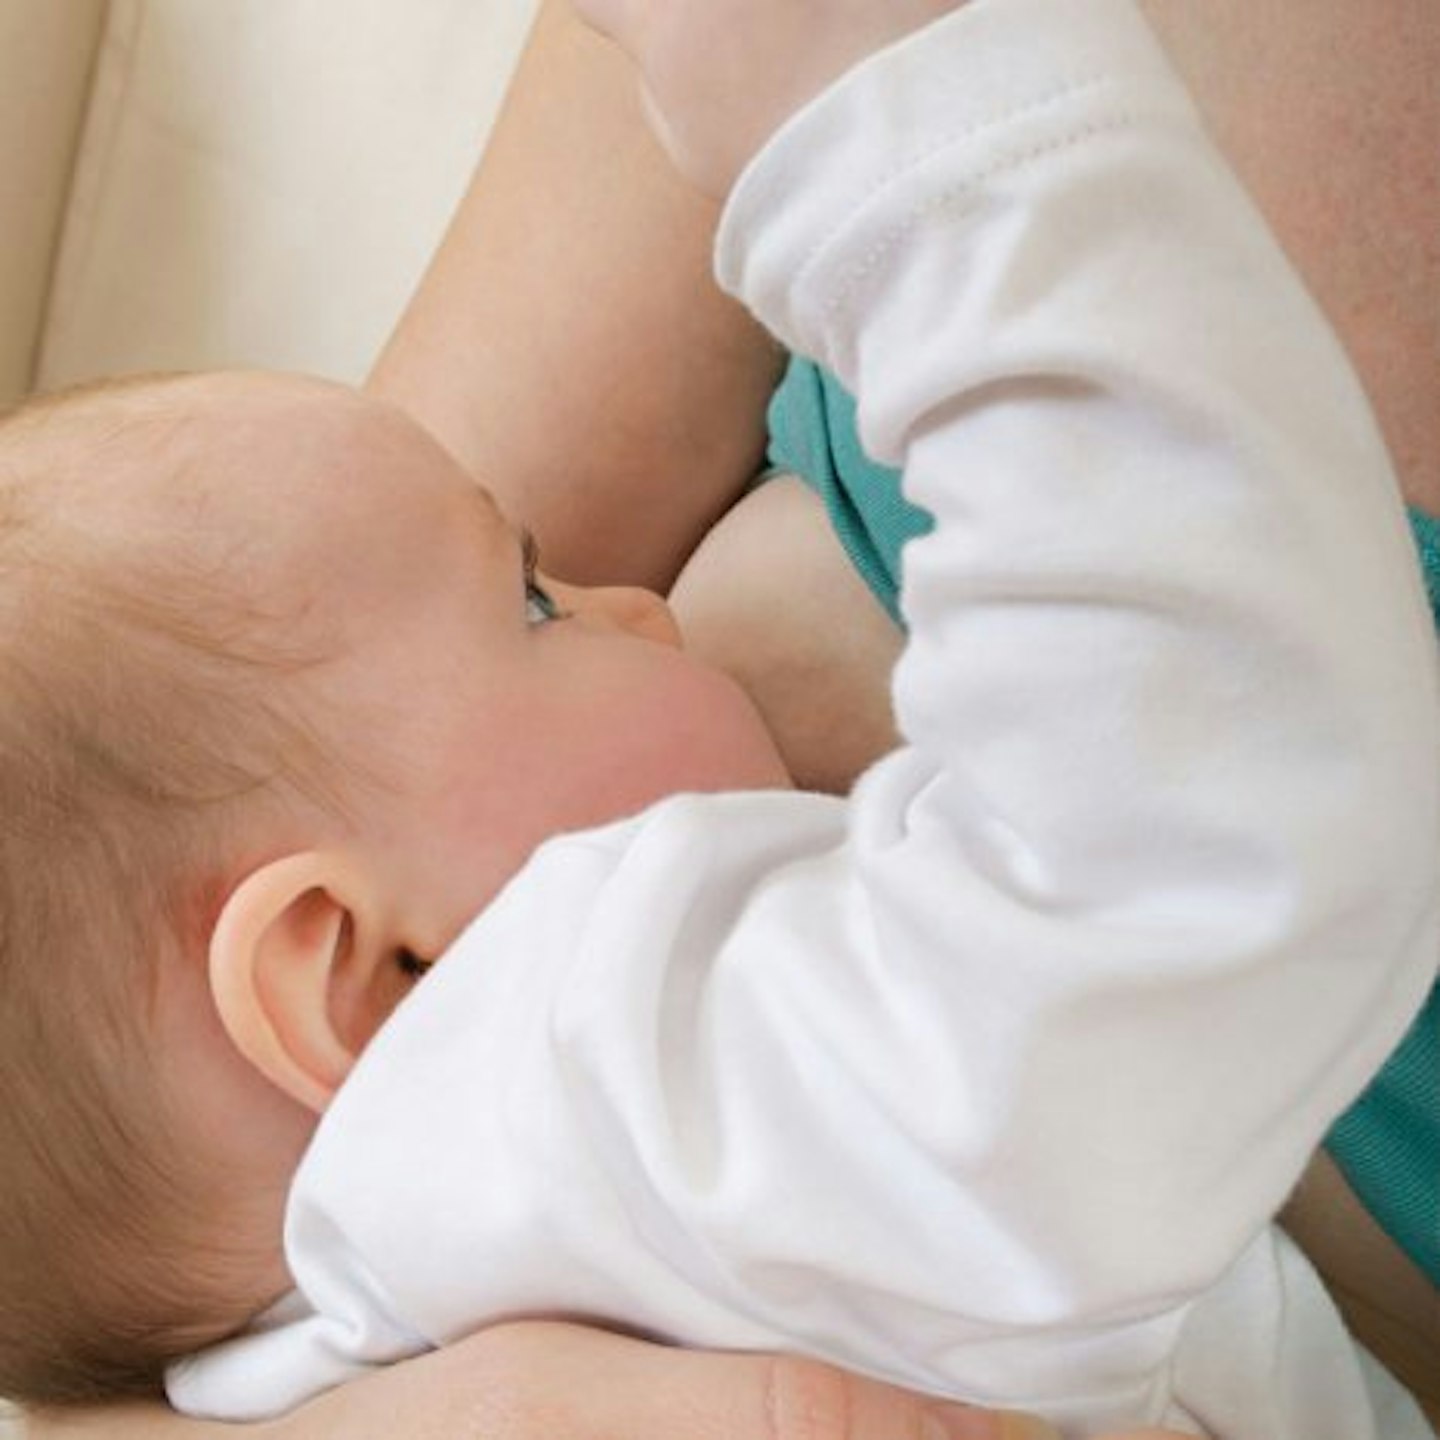 Should breastfeeding in public be frowned upon?